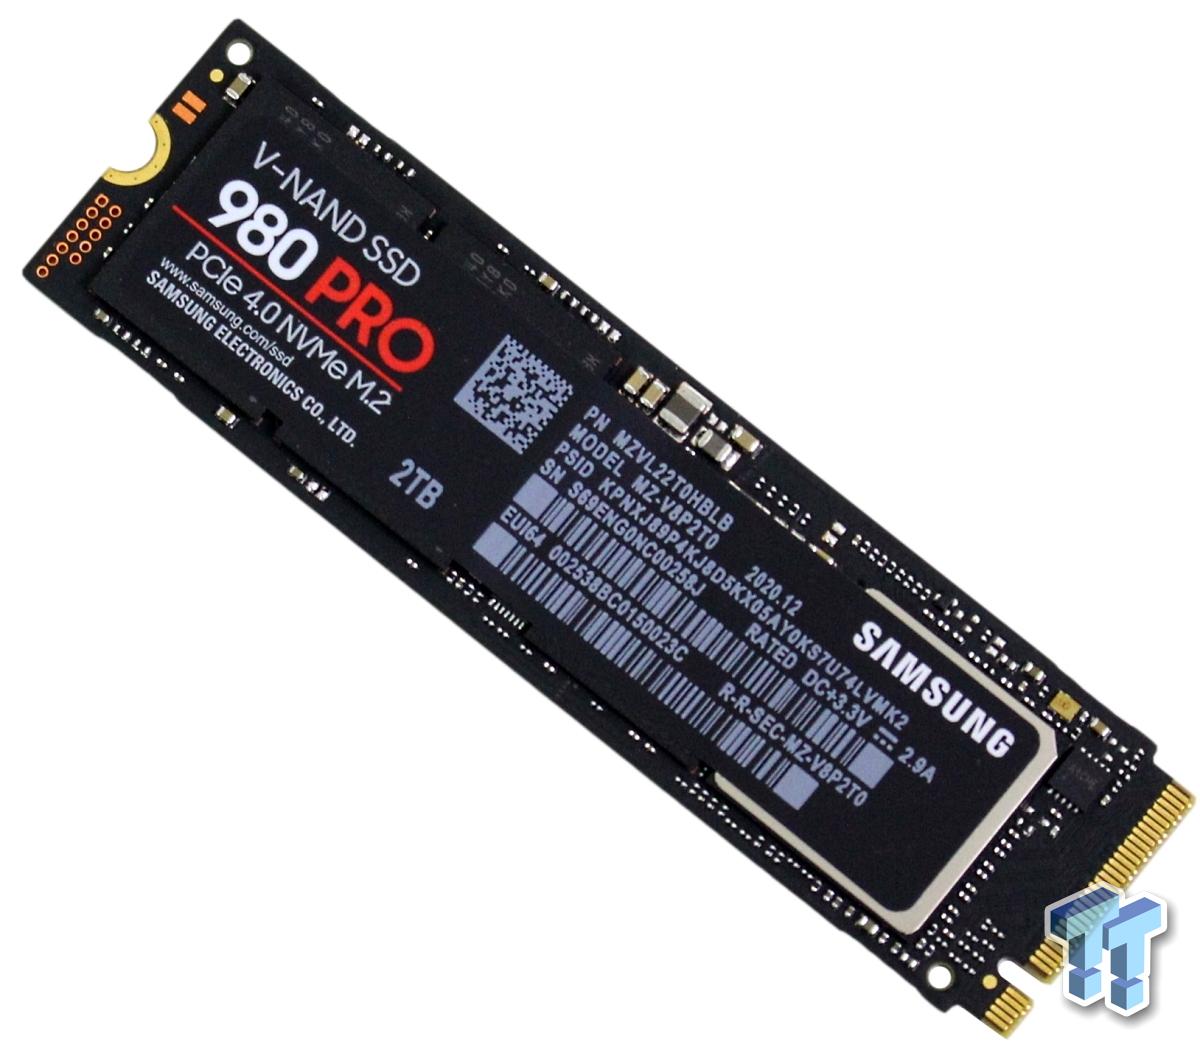 Rose color Shipley absorption Samsung 980 Pro 2TB M.2 SSD Review | TweakTown